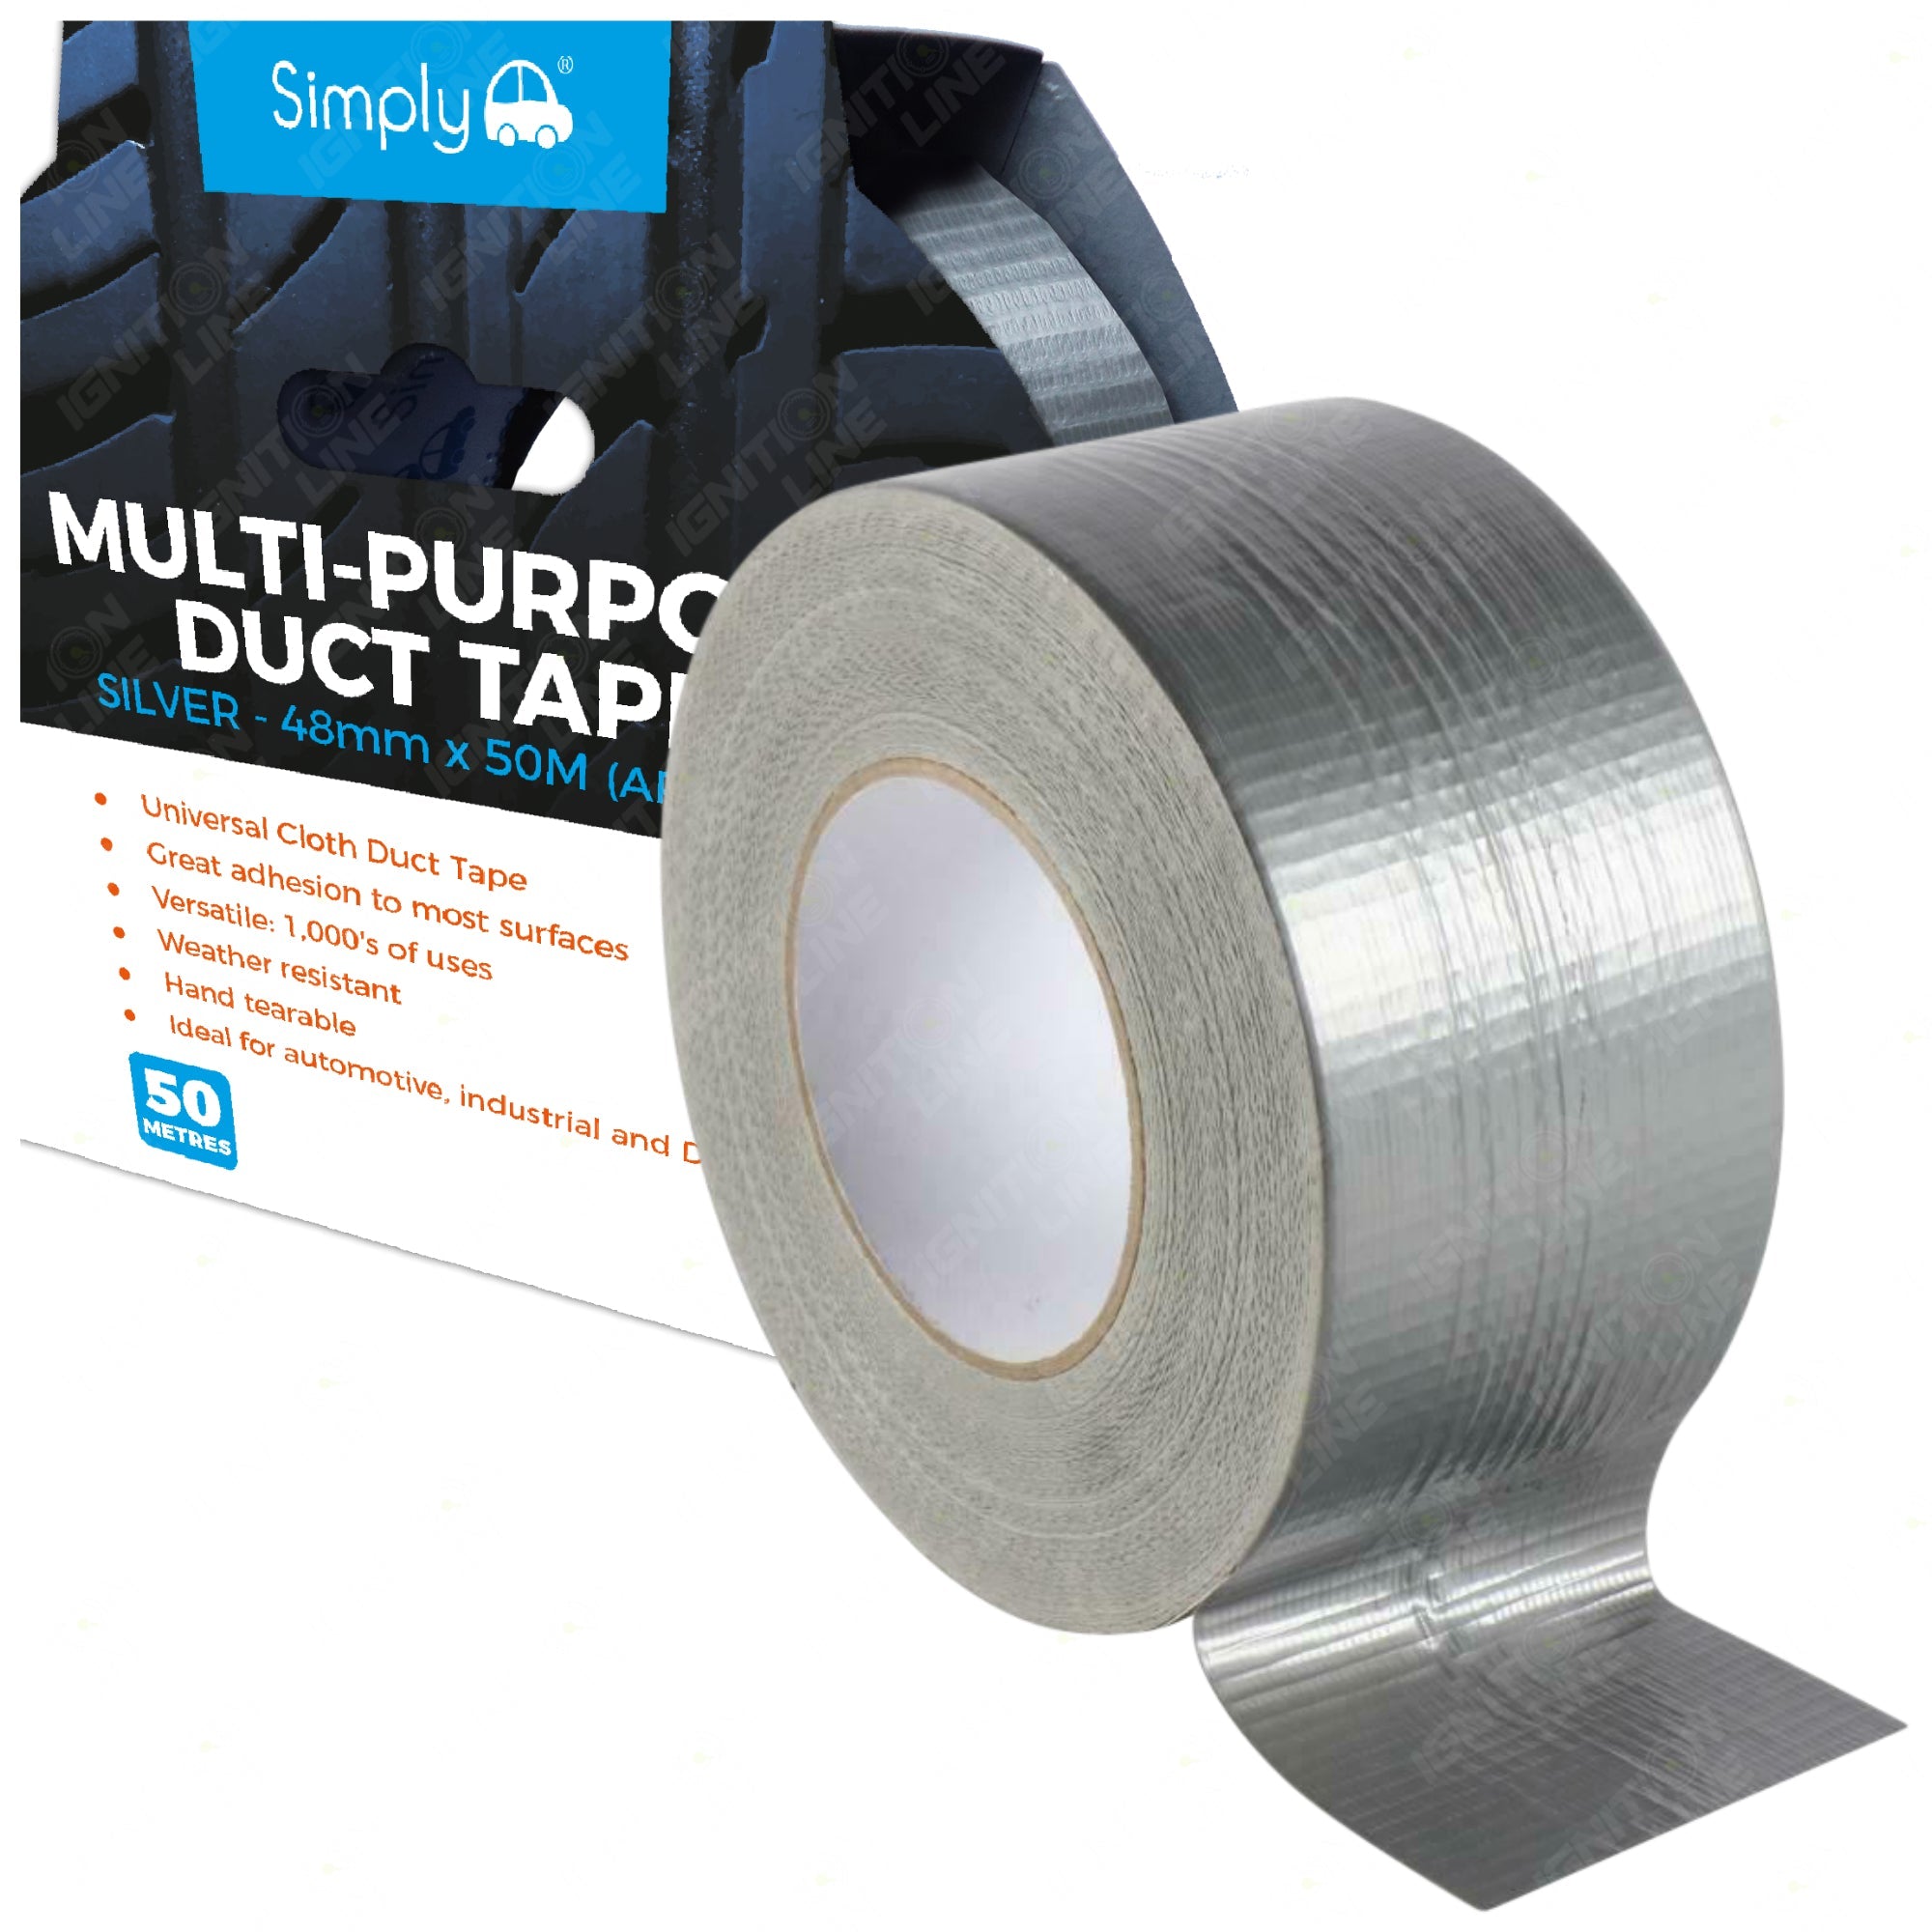 Simply Duct Tape 48mm x 50M Silver